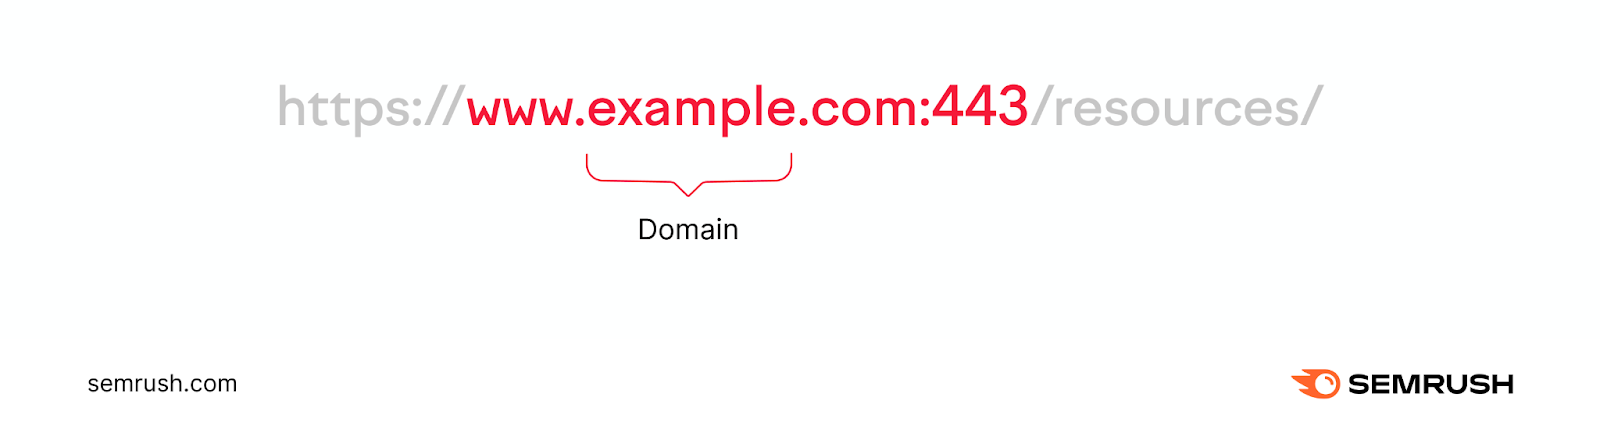 An URL with "example" part marked as "domain"